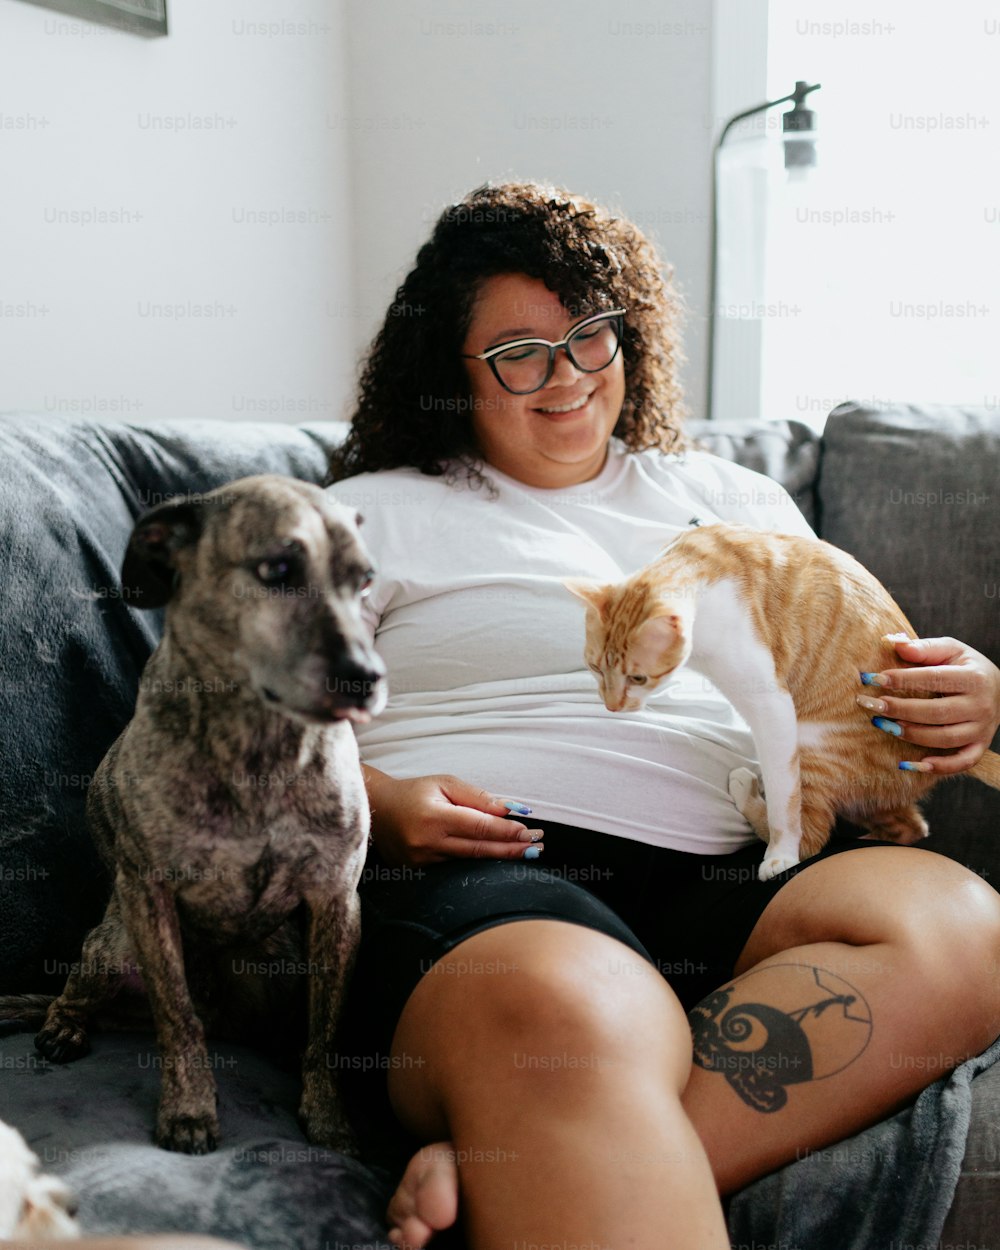 a woman sitting on a couch holding a cat and a dog